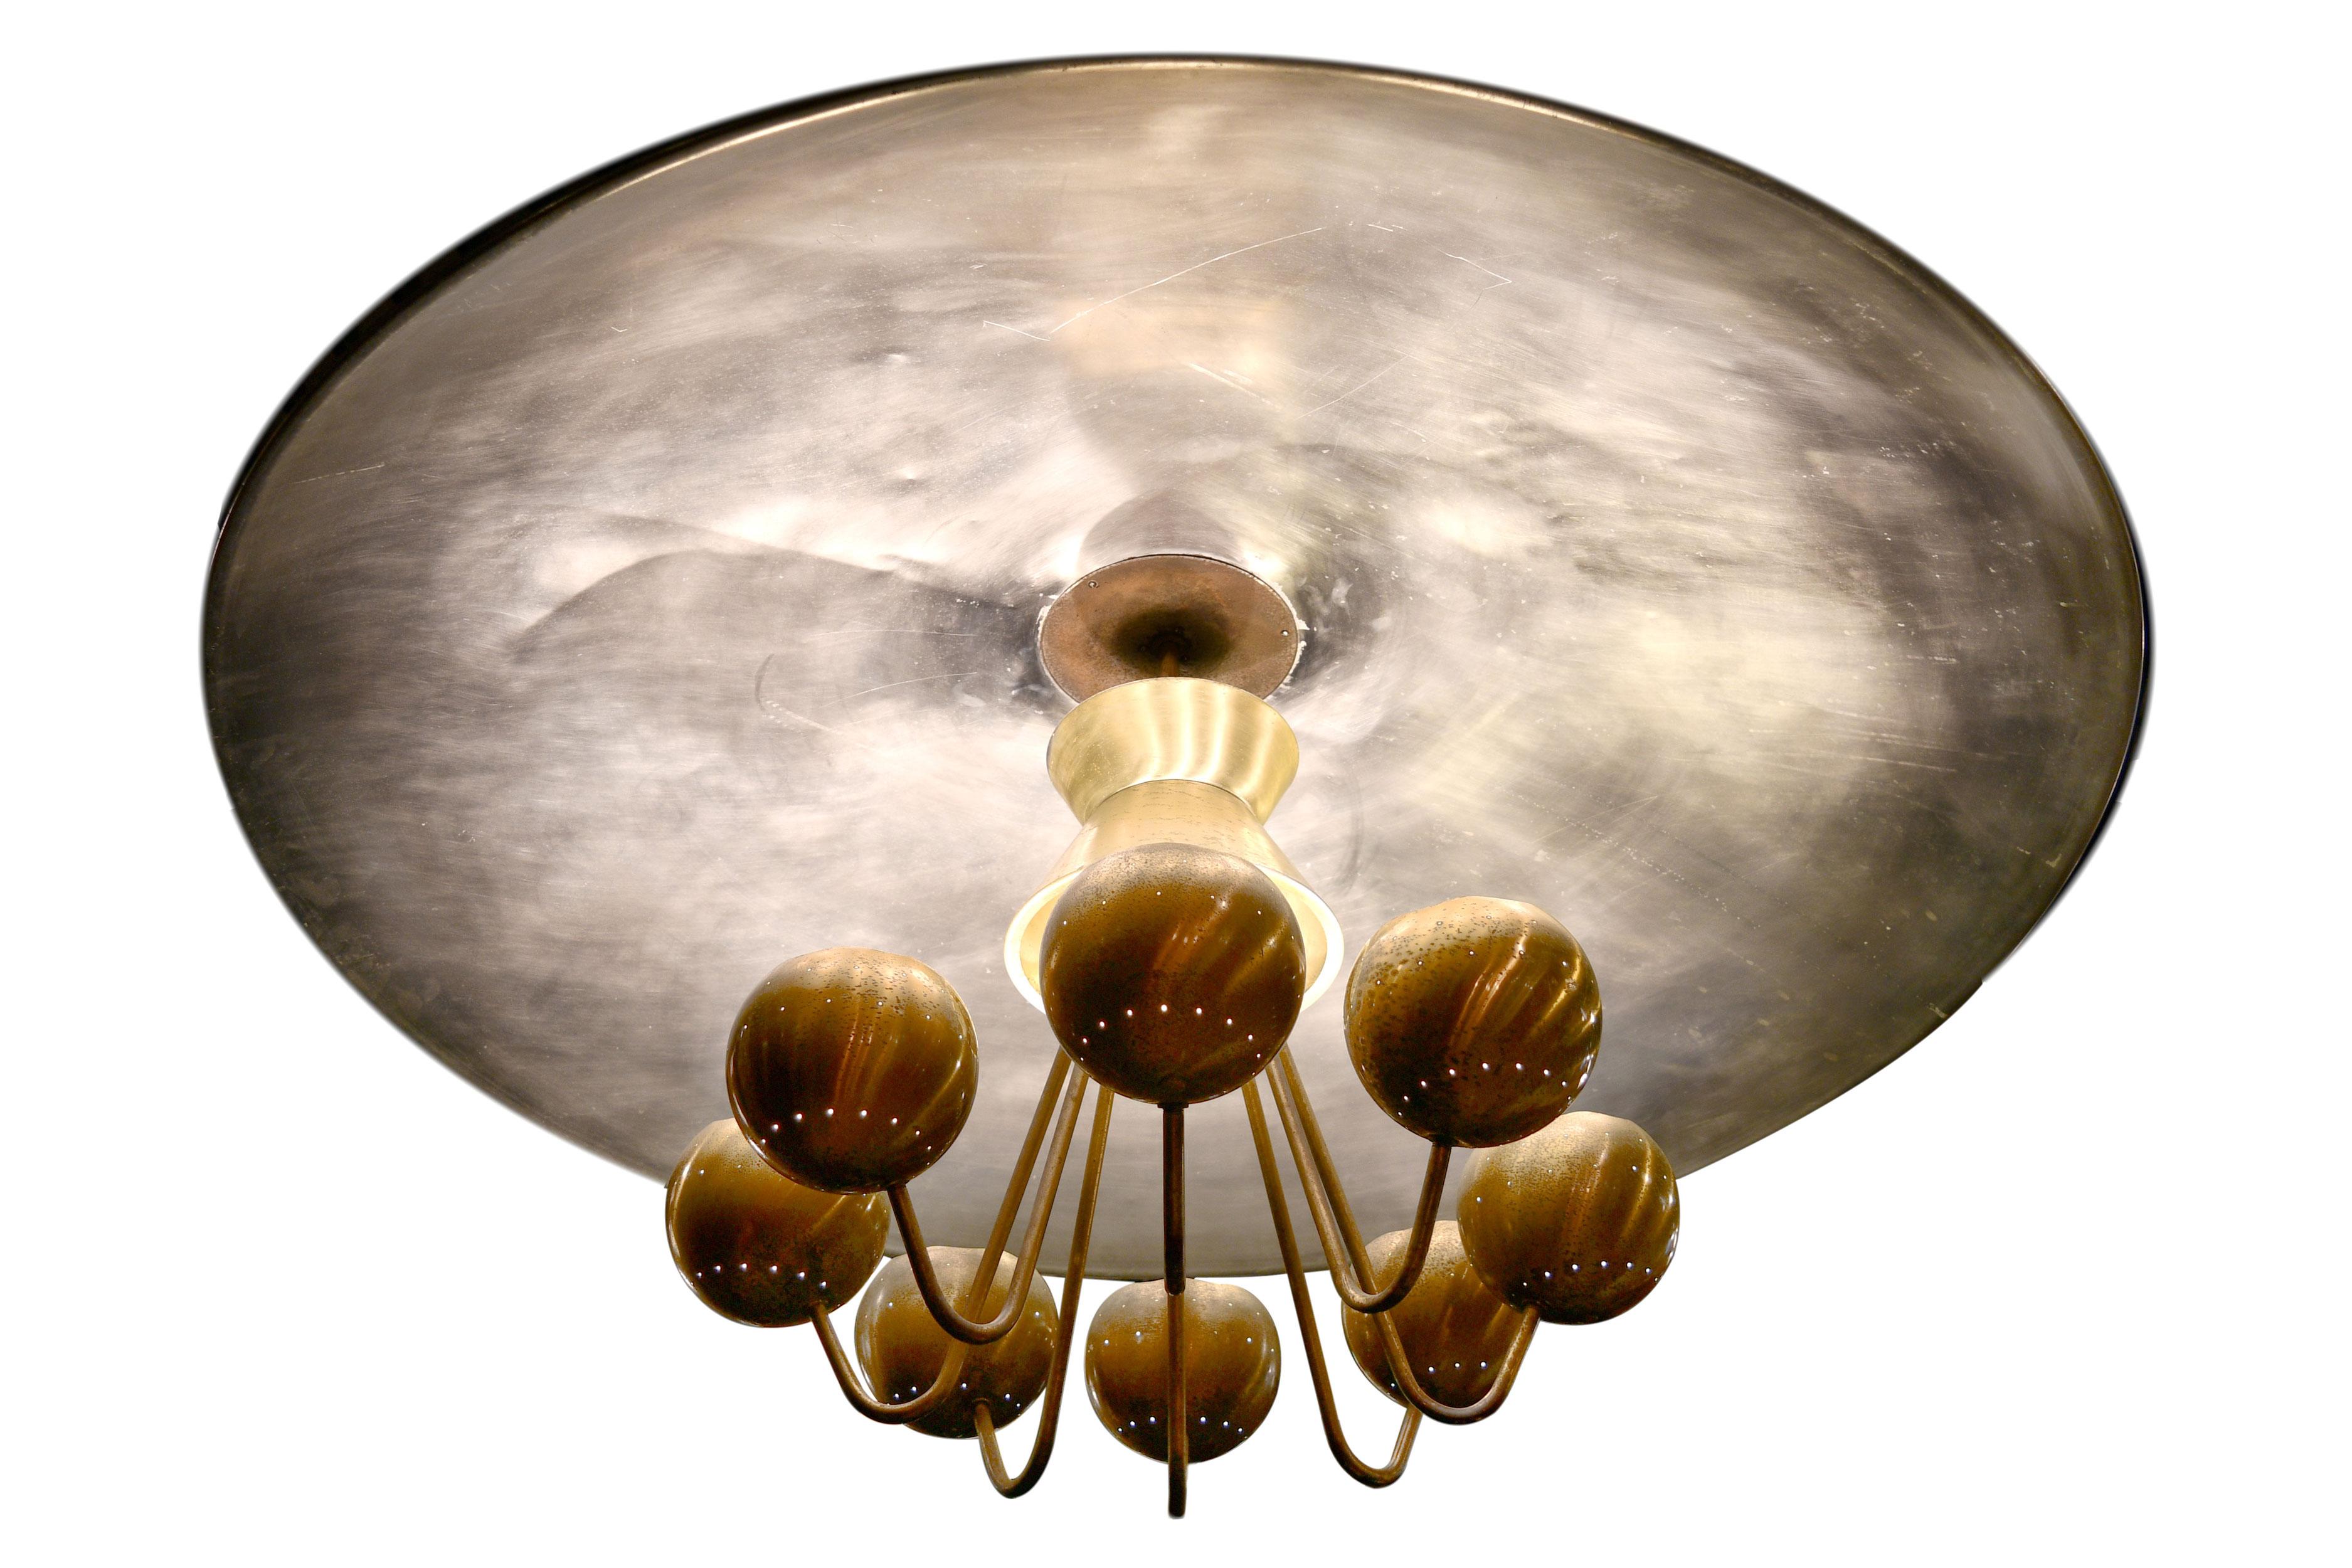 American Mid-Century Modern 8-Light Chandelier with Massive Reflector Bowl